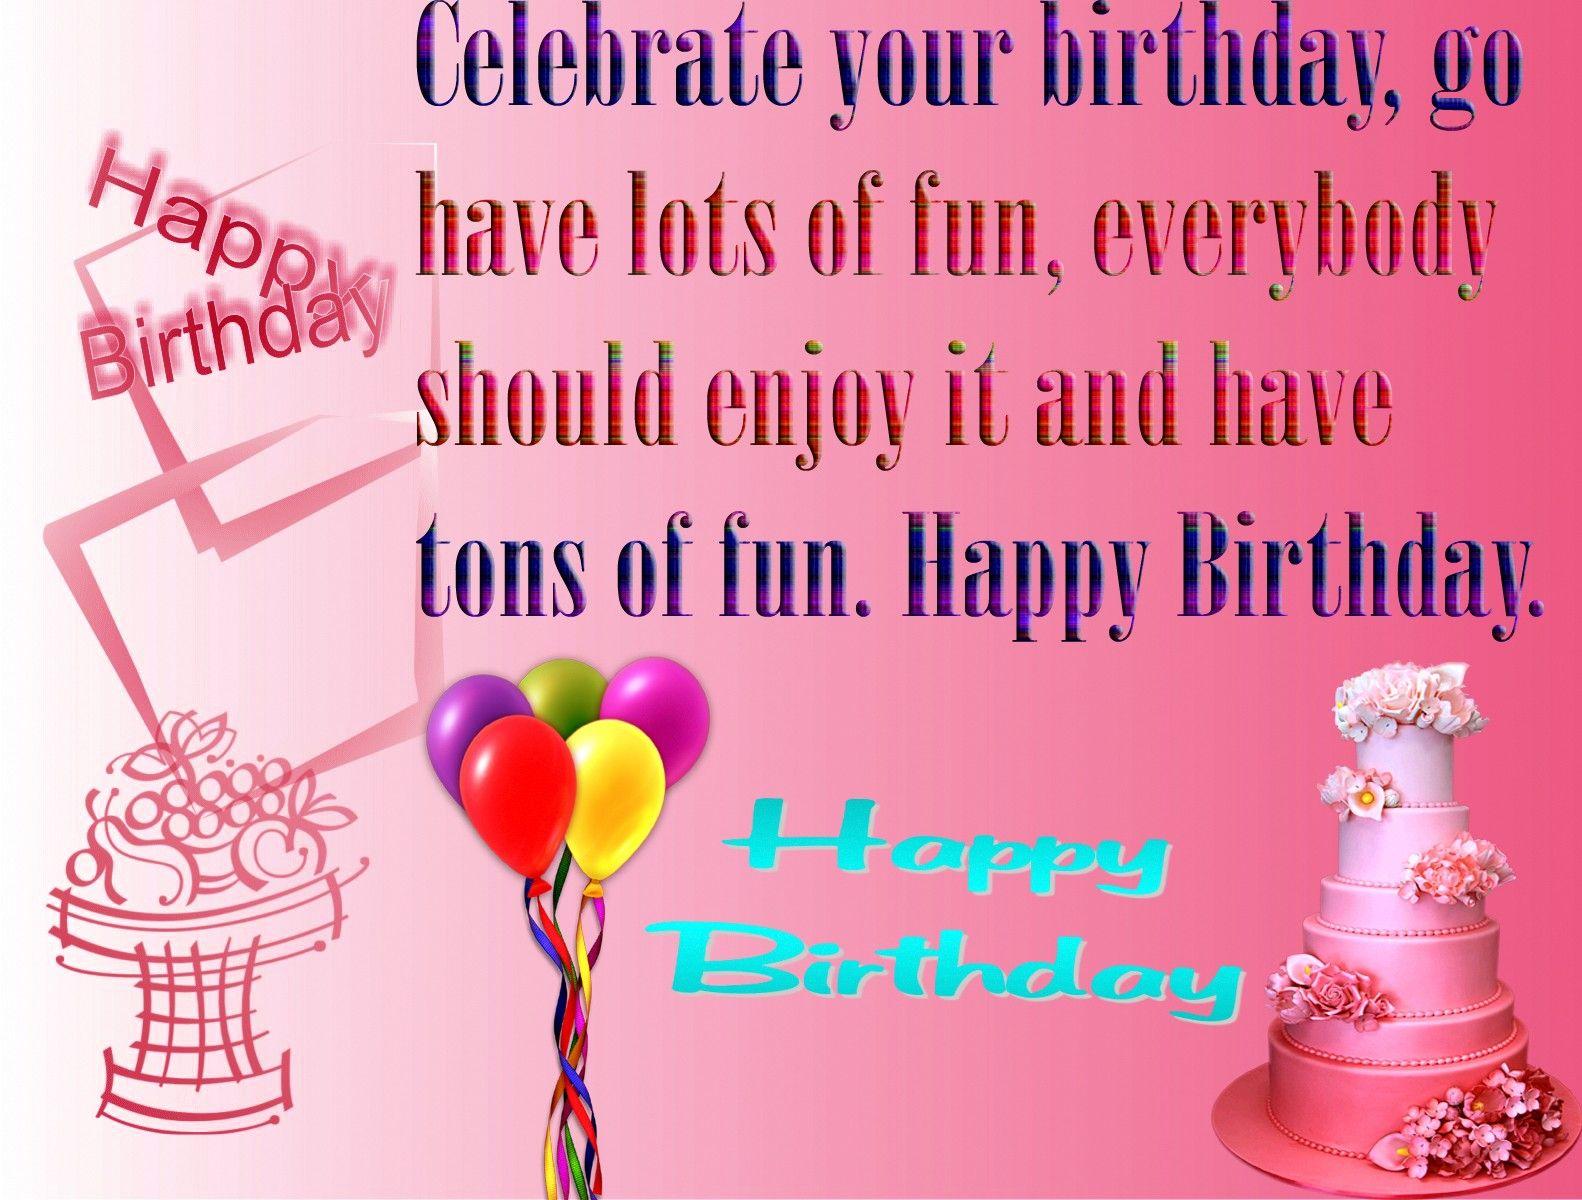 Family Birthday Greetings Image collections card design